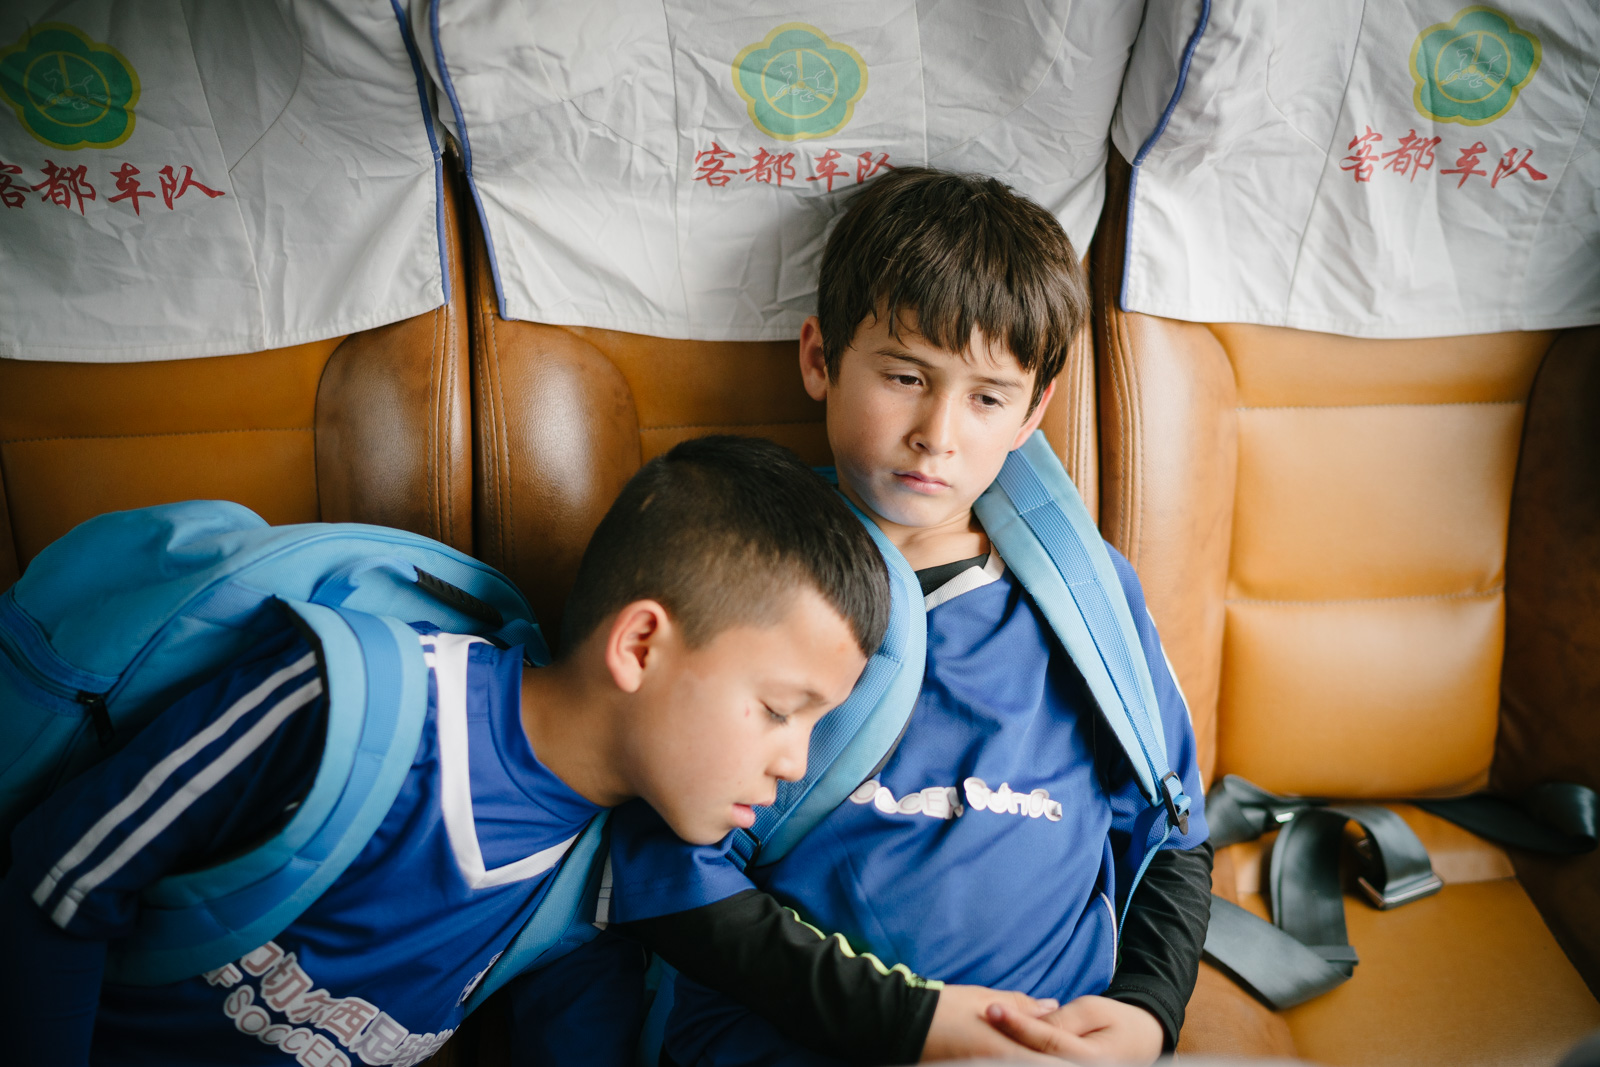 Kasim and Muhammad on their way to a football match in downtown Meizhou representing R&amp;F Soccer School. March 20, 2016.